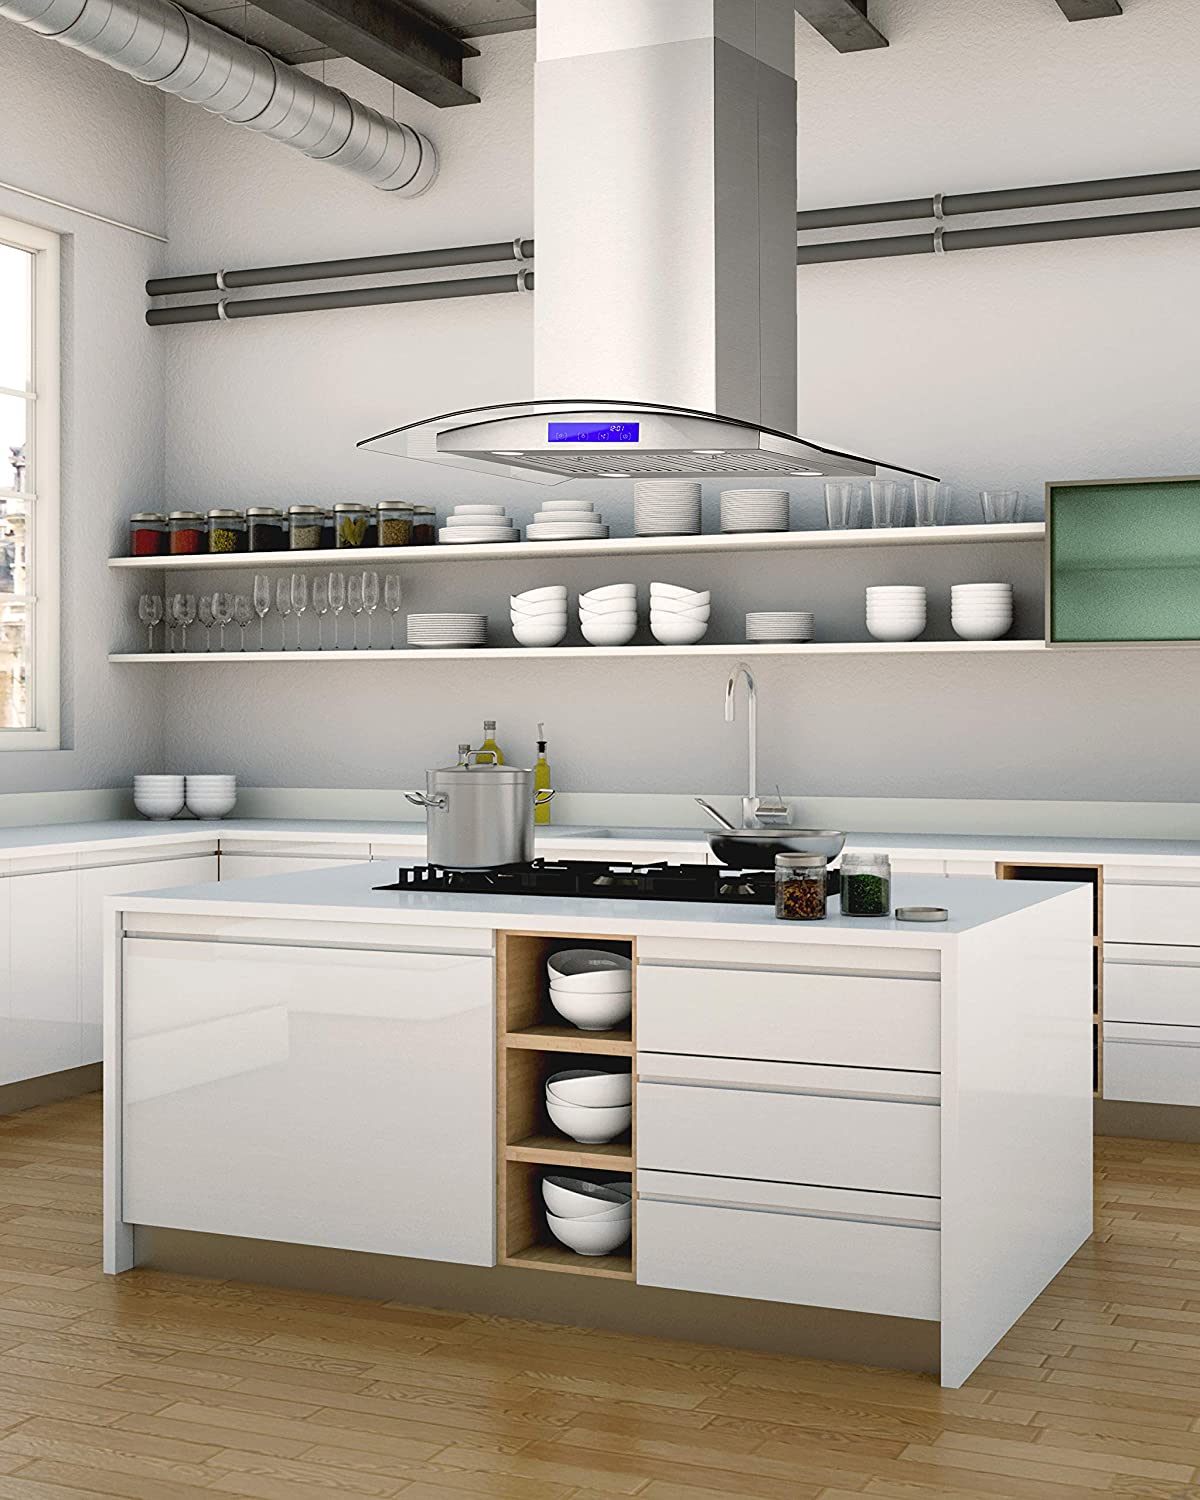 How to Choose the Best Range hood for Asian Cooking